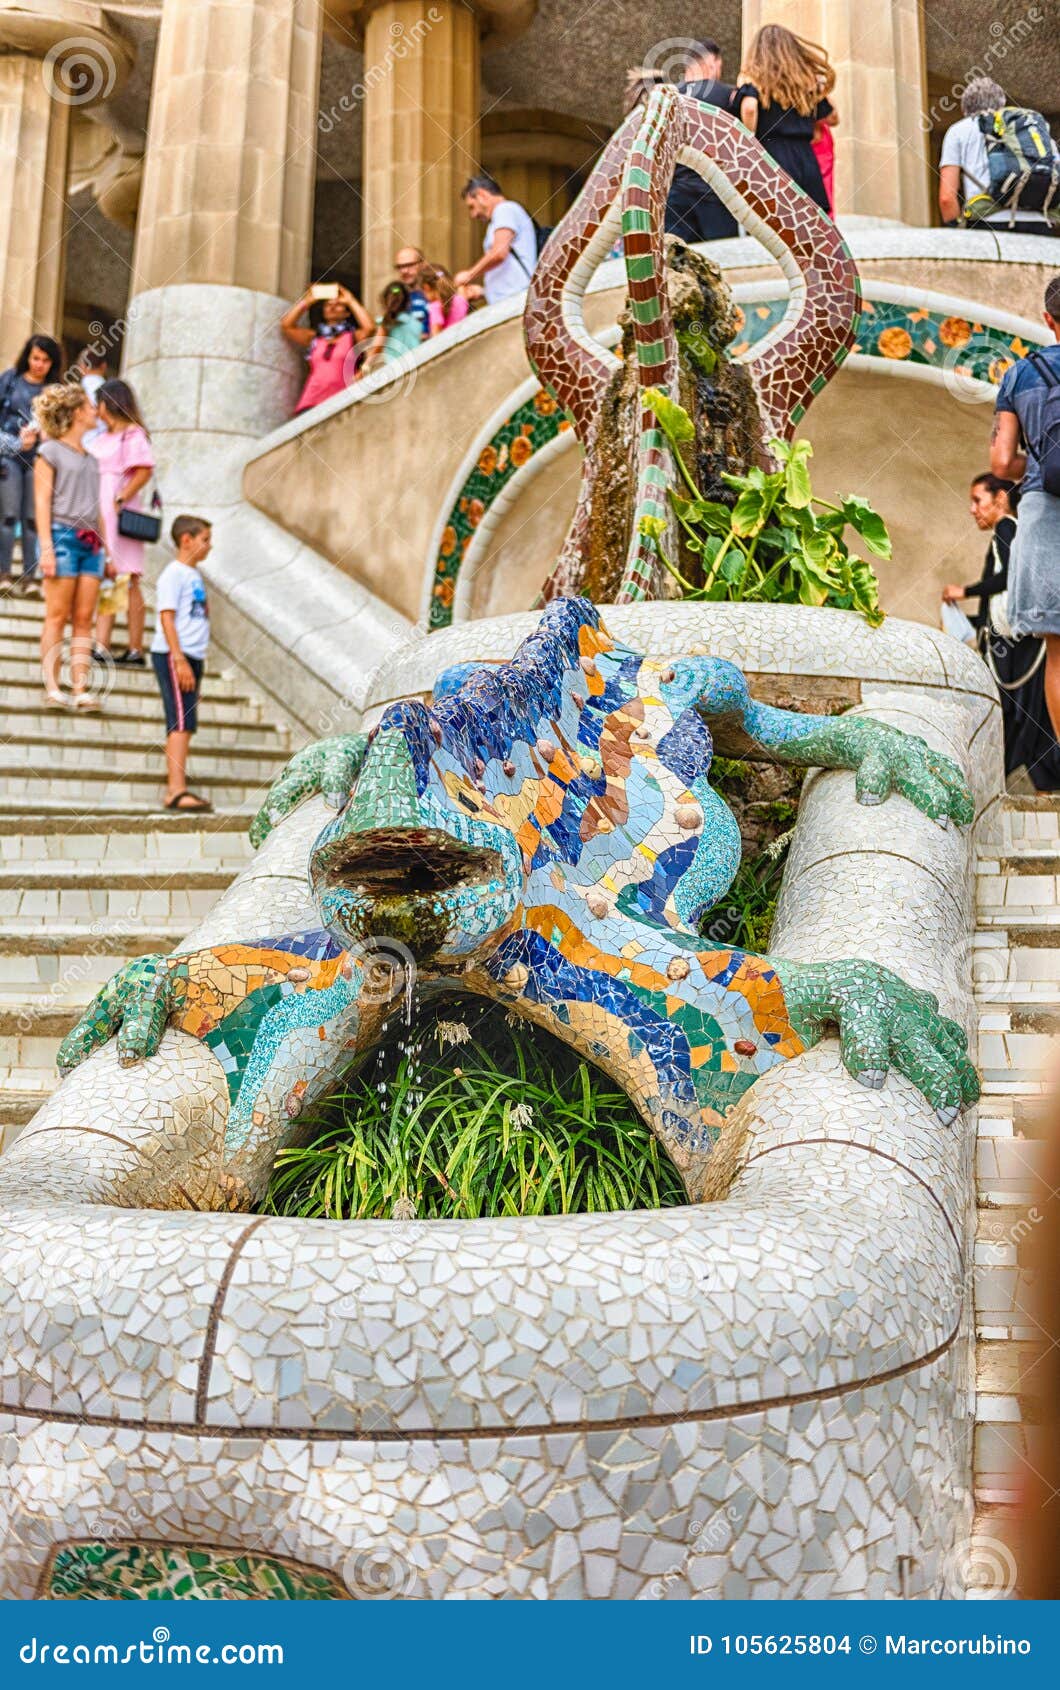 The Iconic Dragon Sculpture In Park Guell Barcelona Catalonia Spain Editorial Stock Image Image Of Sculpture Outdoor